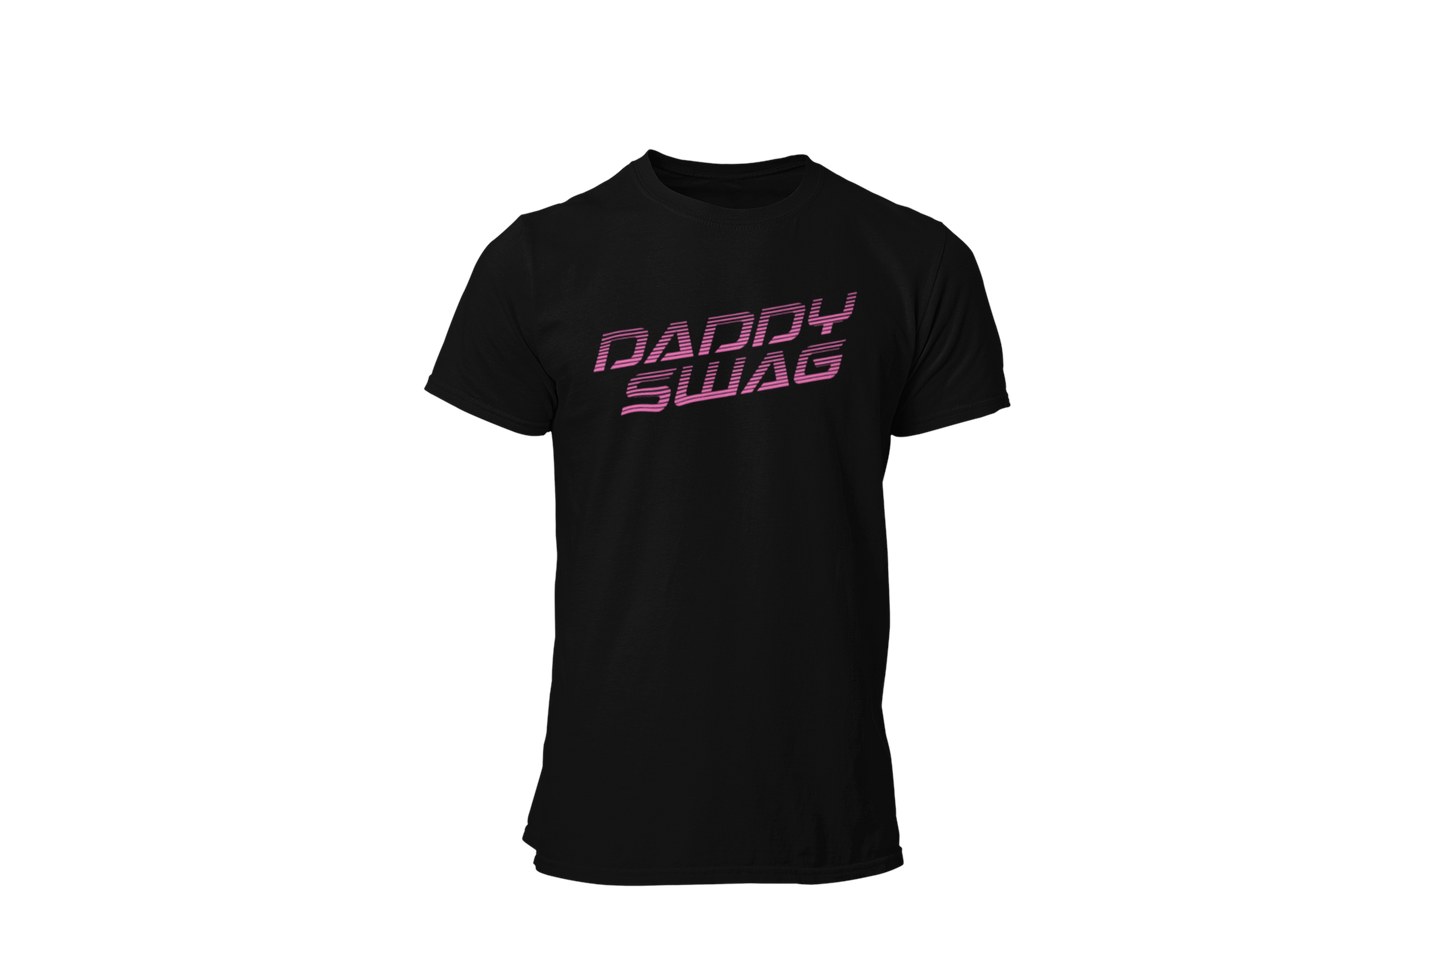 DADDY SWAG FATHER IS FUTURE COLLECTION T-SHIRT